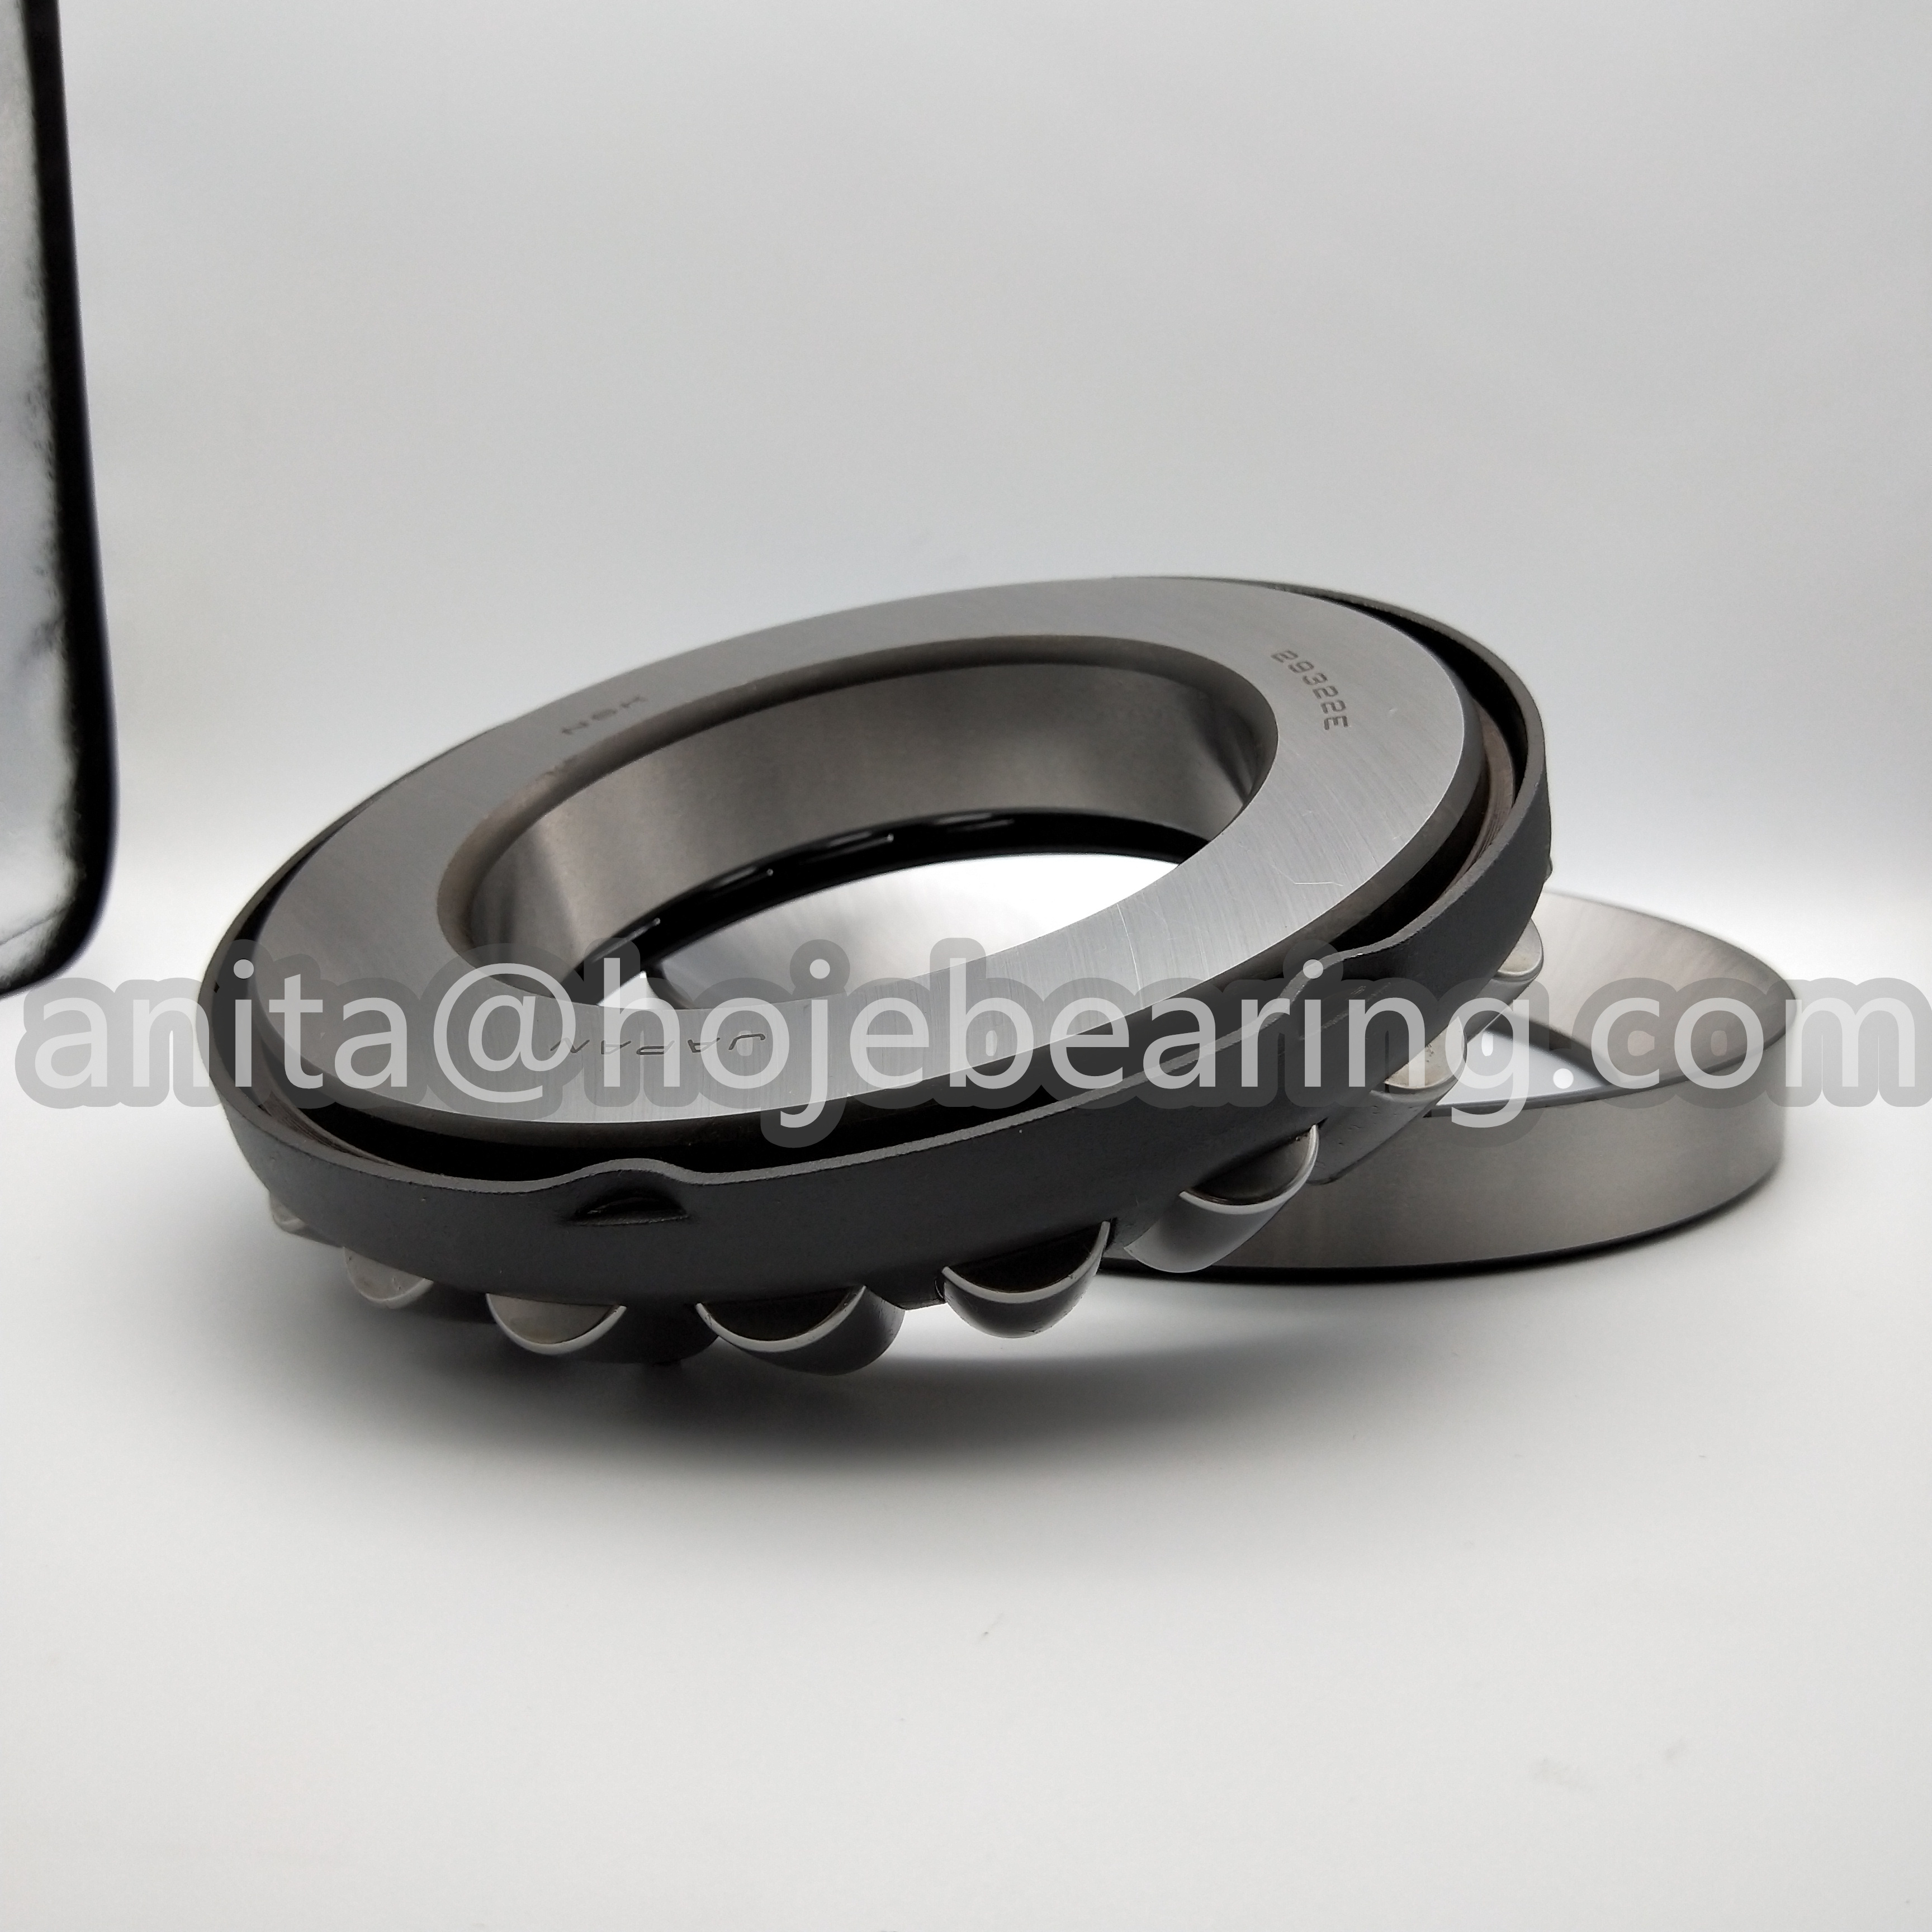 NSK 29322 E Spherical Roller Thrust Bearing - 110 mm Bore, 190 mm OD, 48 mm Width,Self Aligning; Not Banded; Steel Cage